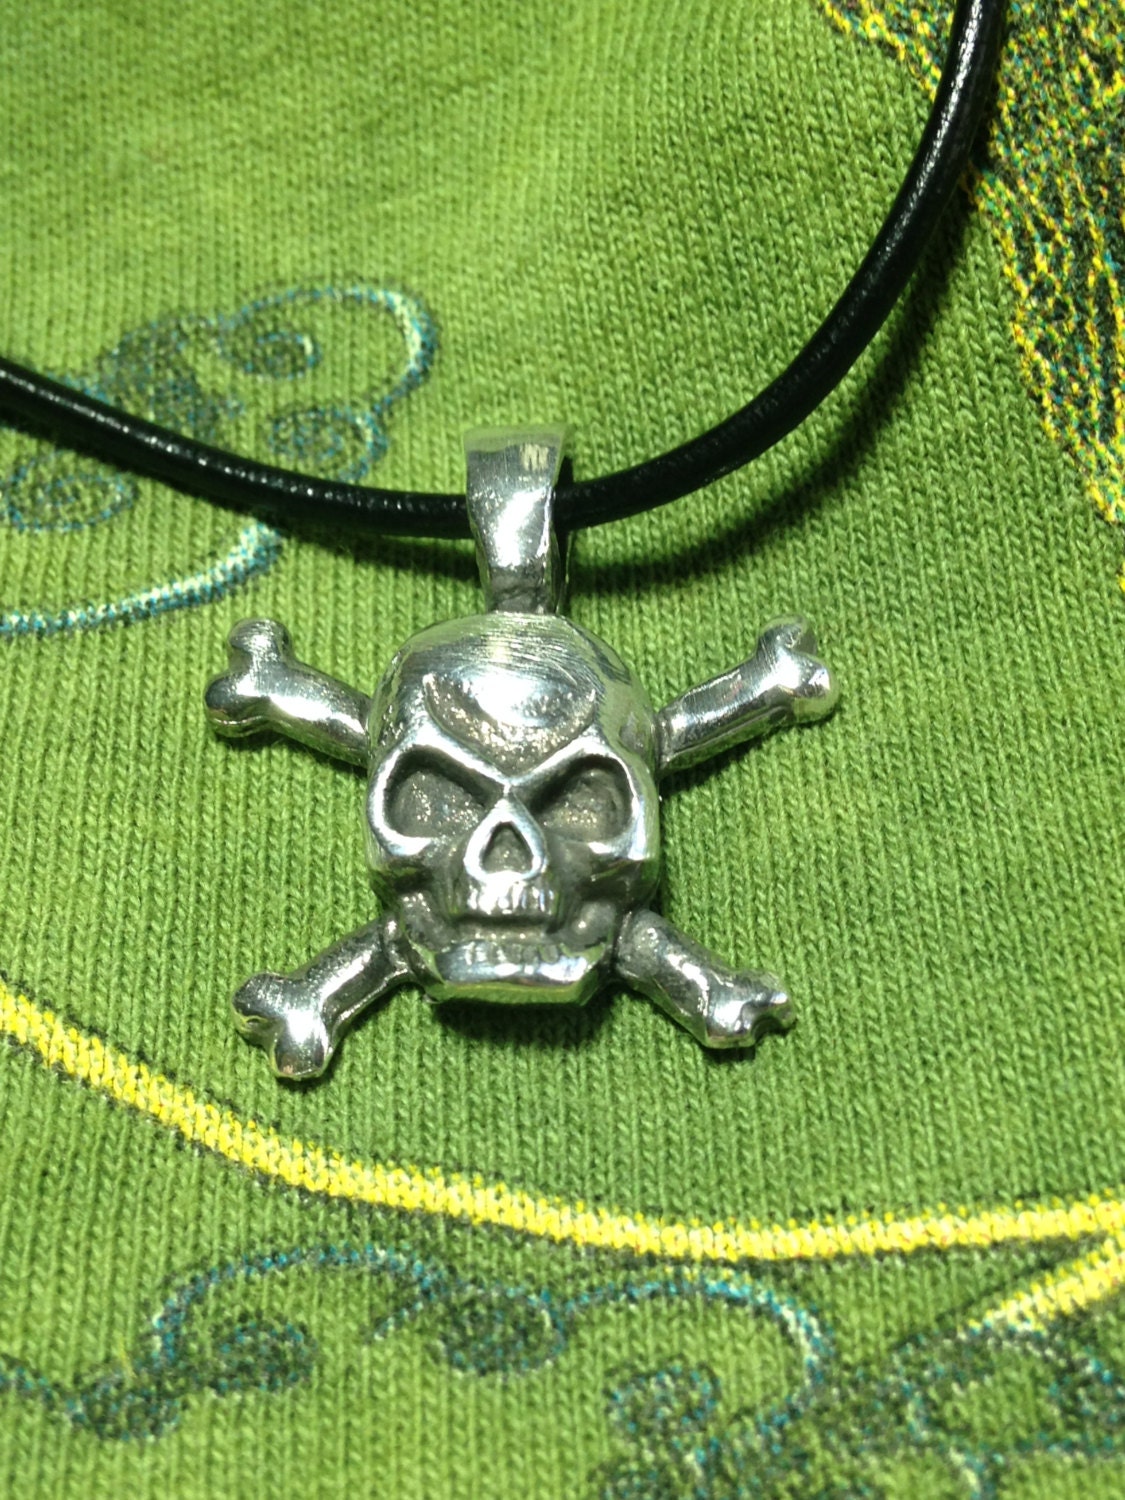 Pirate Flag Jewelry in Fine Pewter Pirate Skull and Crossbones Pendant 